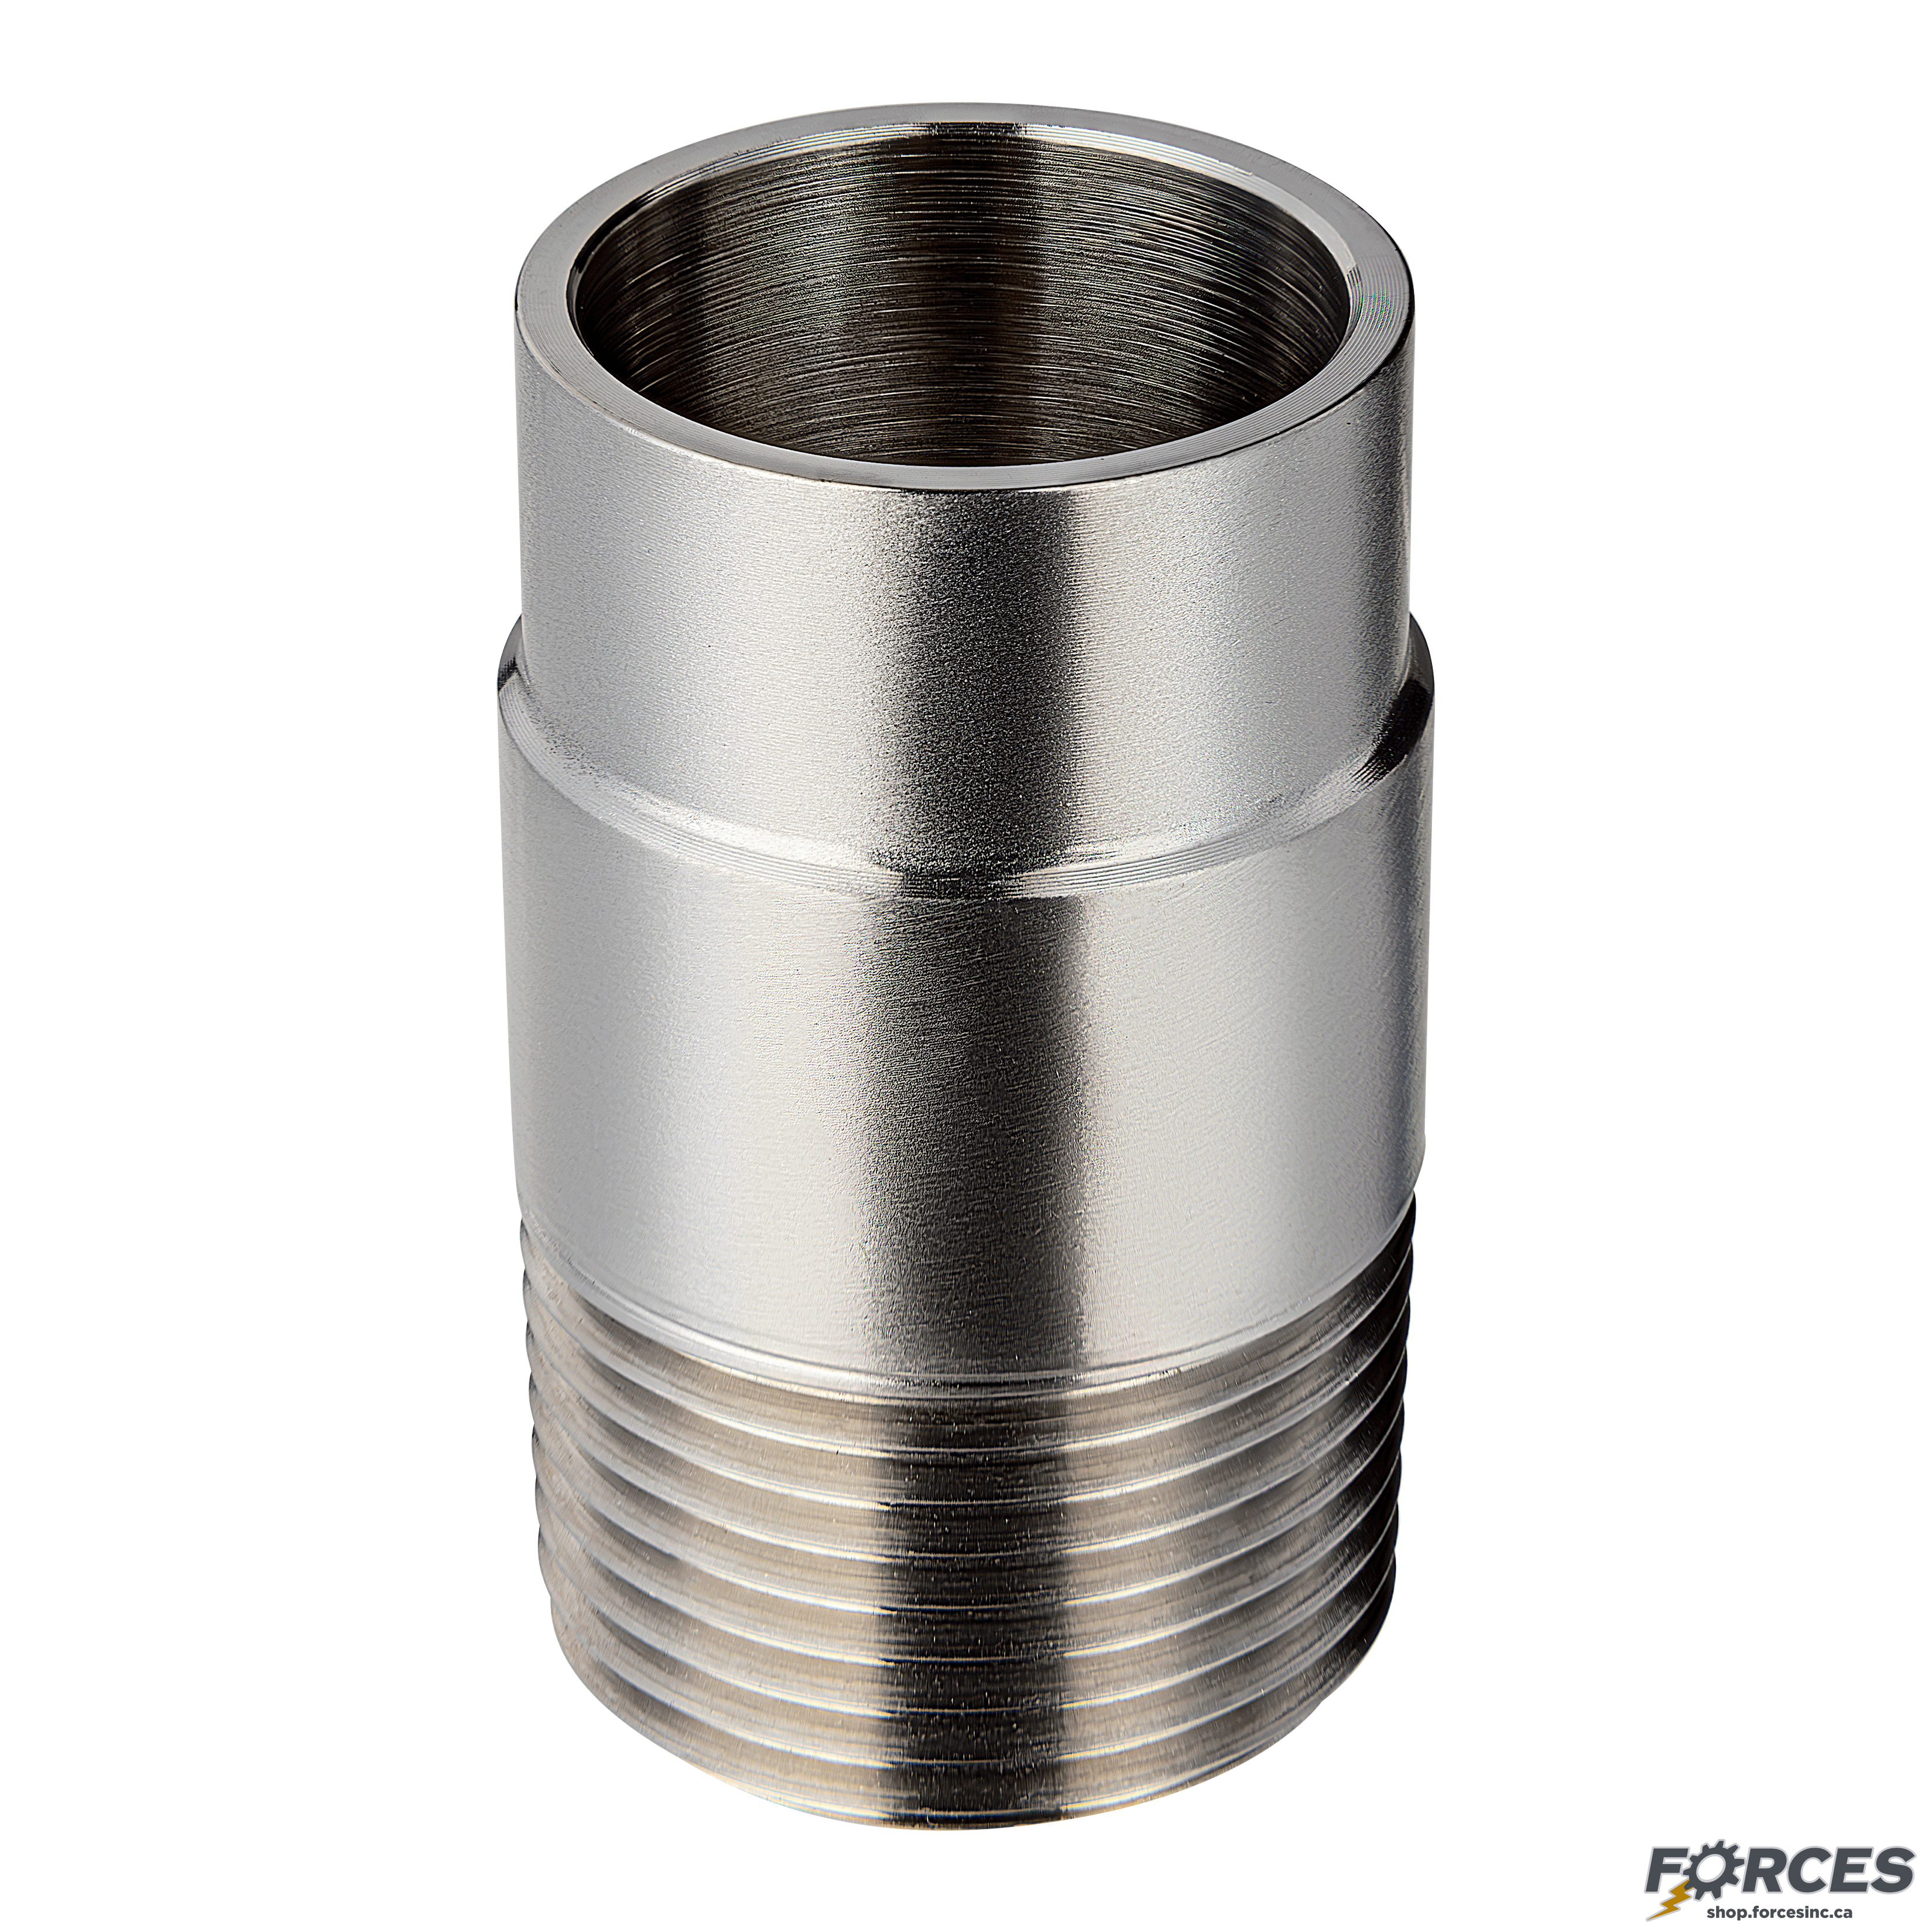 1" x 1" Butt Weld x Male NPT Adapter - Stainless Steel 316 - Forces Inc